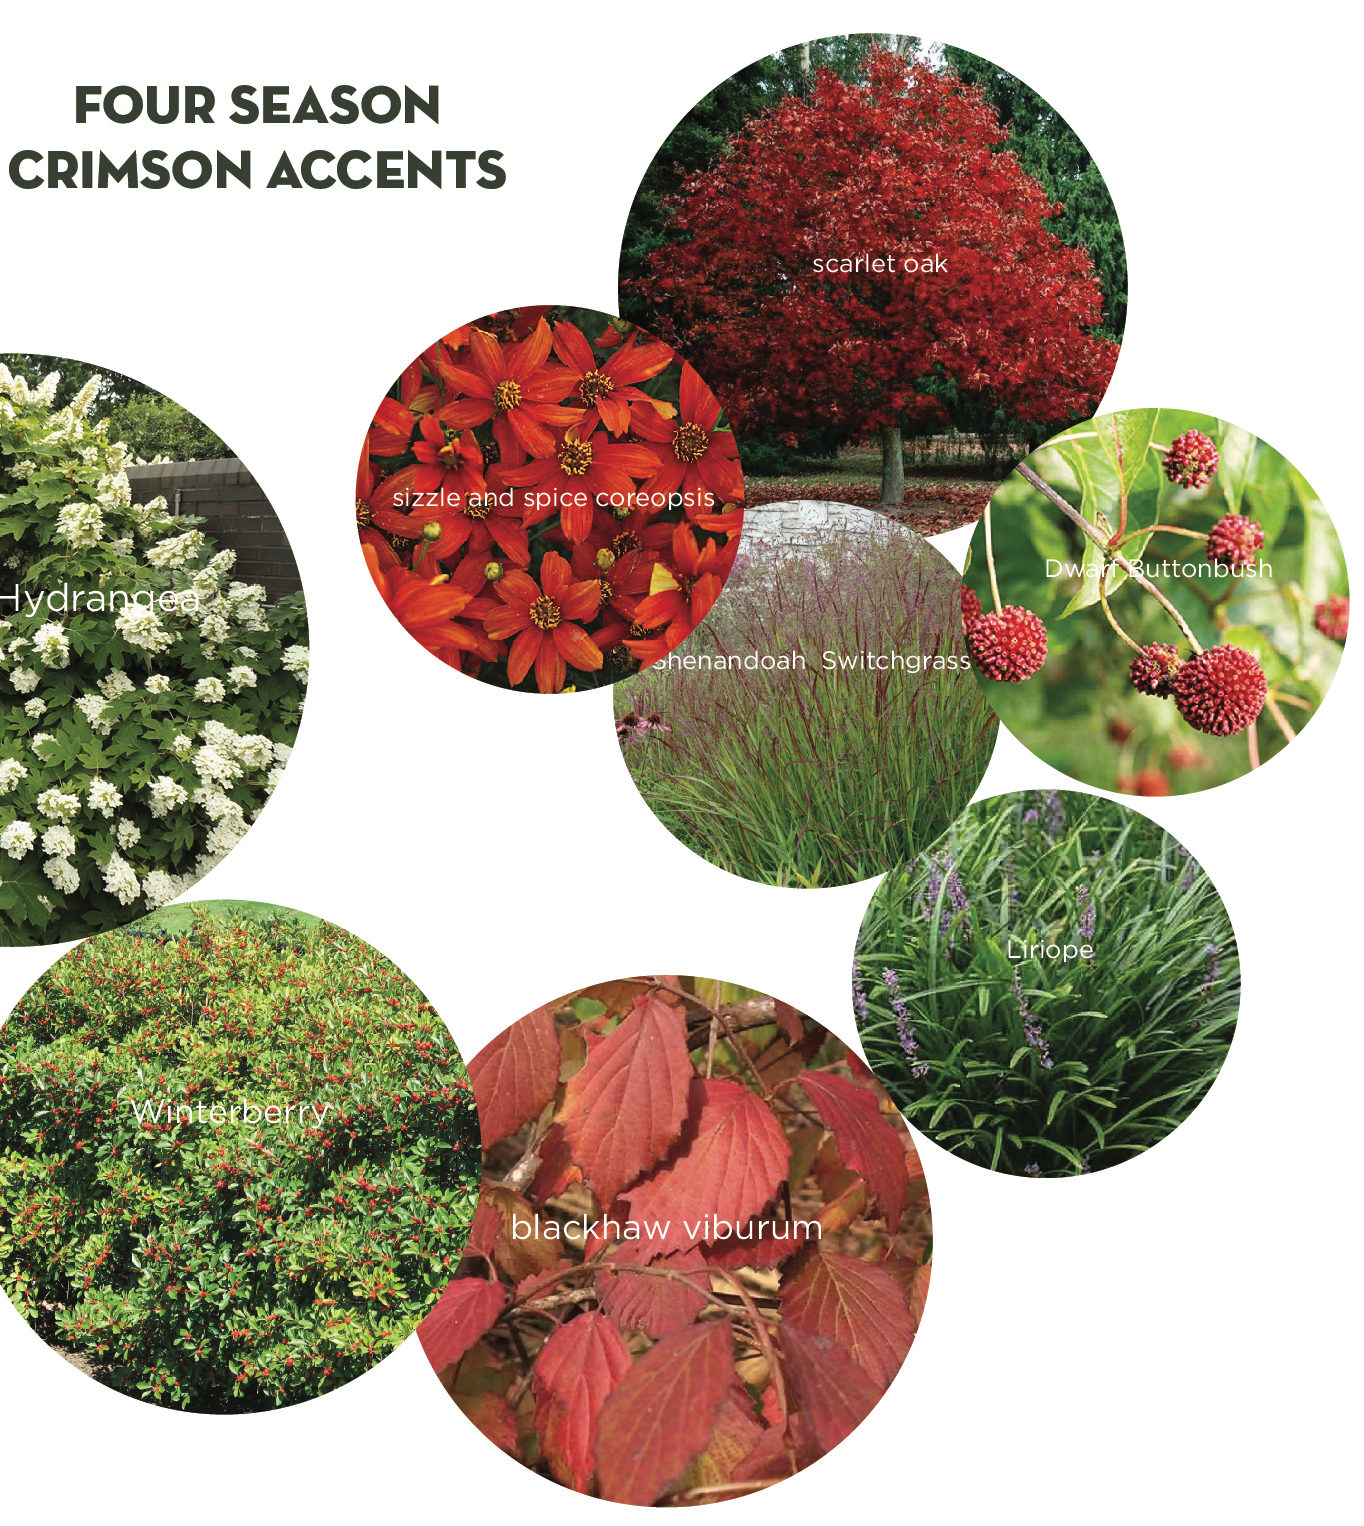 Four Season Crimson Accents a red oak, red sphere seed capsules of dwarf buttonbush, red leaves of blackhaw viburnum